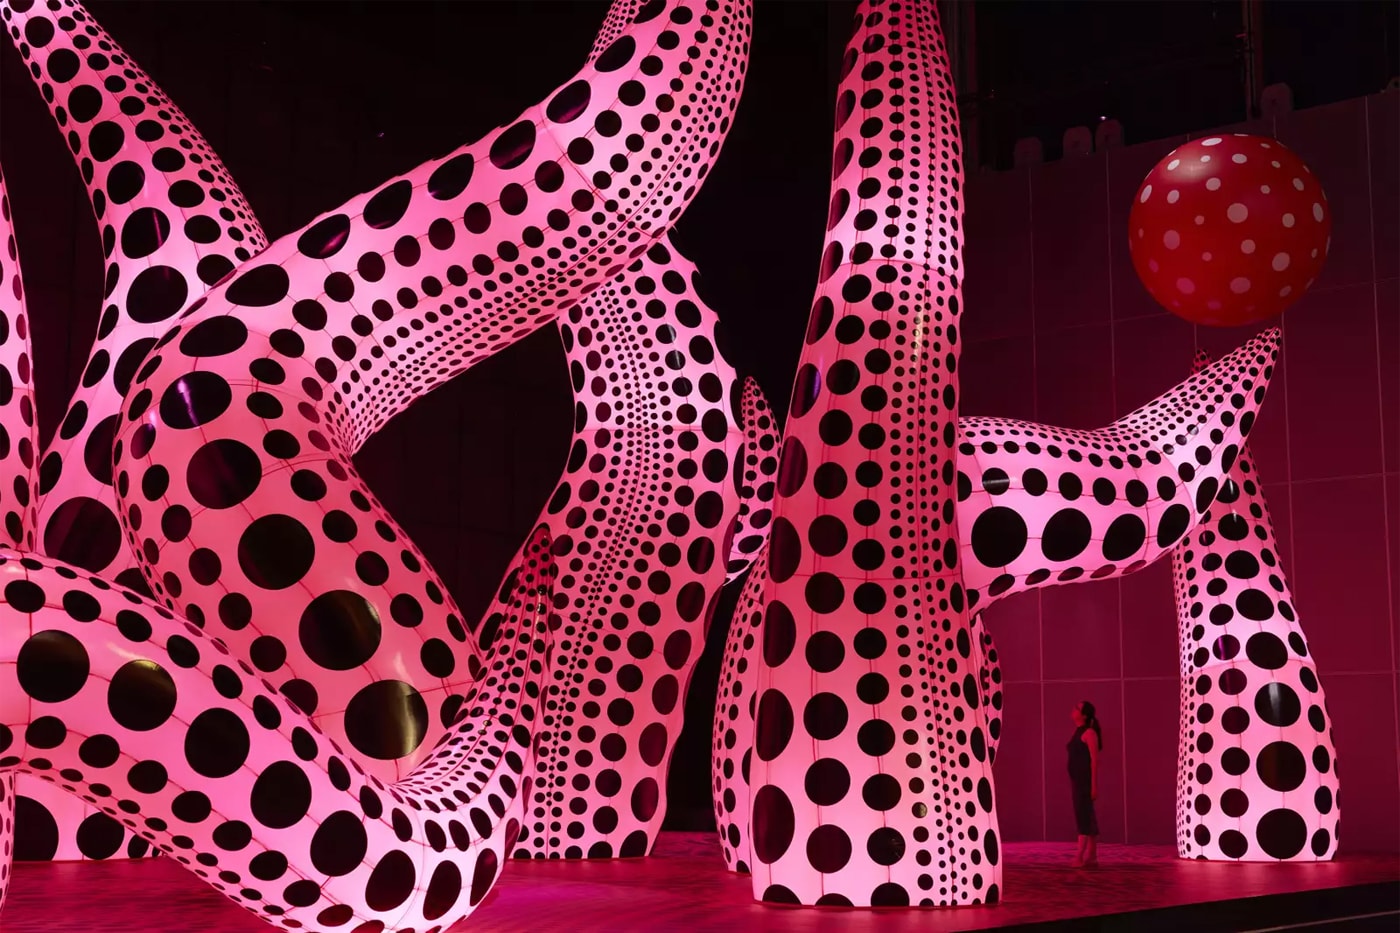 Yayoi Kusama's Inflatable Works Land in Manchester's 'You, Me and the Balloons' Exhibition louis vuitton united kingdom tate modern polka dots pumpkin